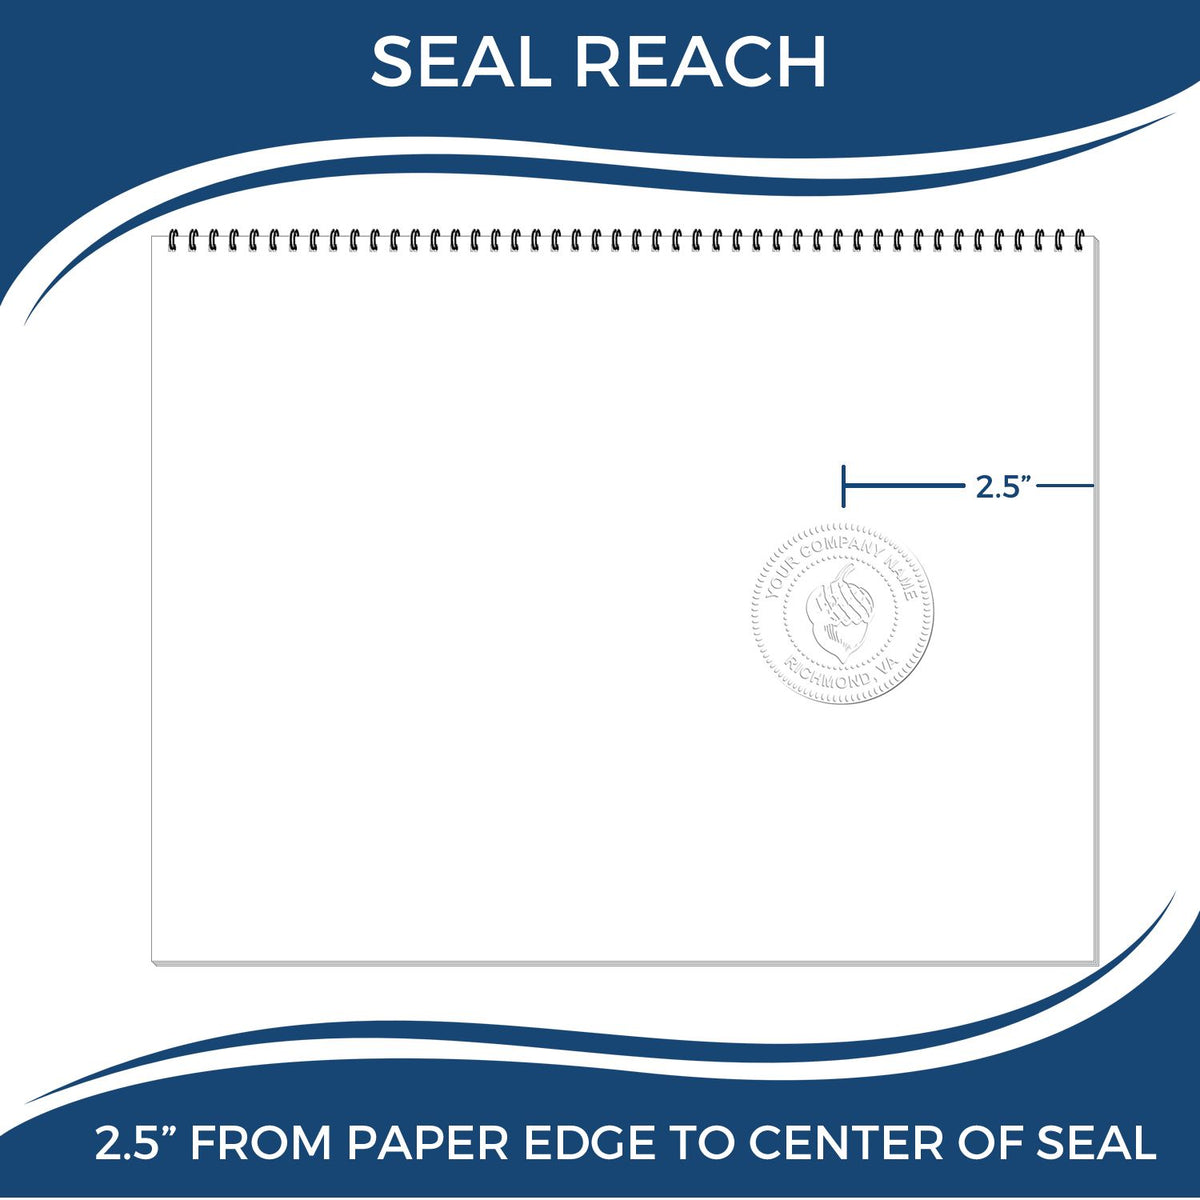 An infographic showing the seal reach which is represented by a ruler and a miniature seal image of the Long Reach Virginia PE Seal